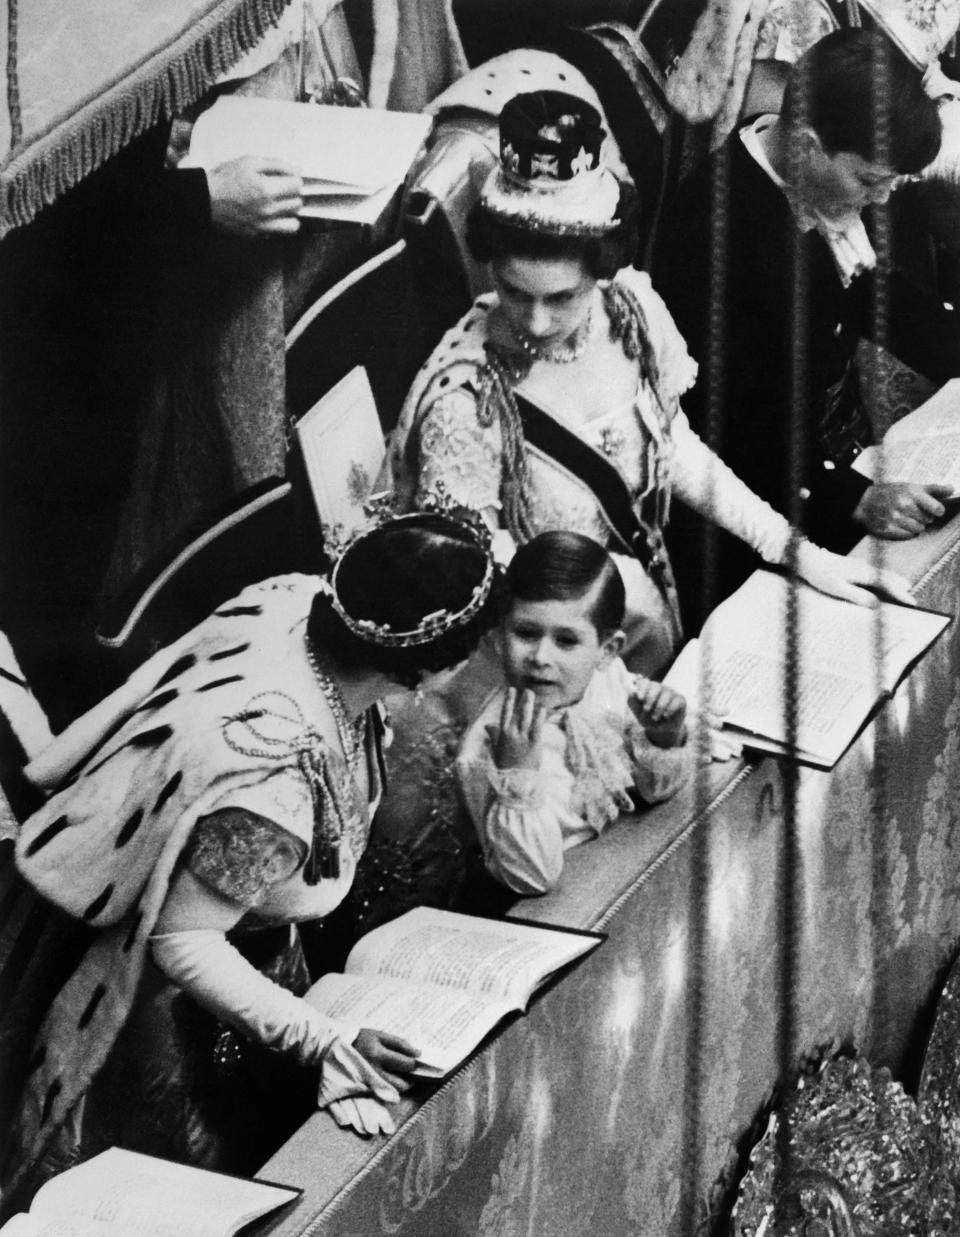 In this file photo taken on June 2, 1953 at London, in the Westminster abbey Prince Charles reacts during the coronation ceremony of his mother, Queen Elizabeth II. Trained from childhood to be king, Charles III has endured the longest wait for the throne in British history. He has spent virtually his entire life waiting to succeed his mother. Their coronations, separated by 70 years, differ in style, size, tone and mission.